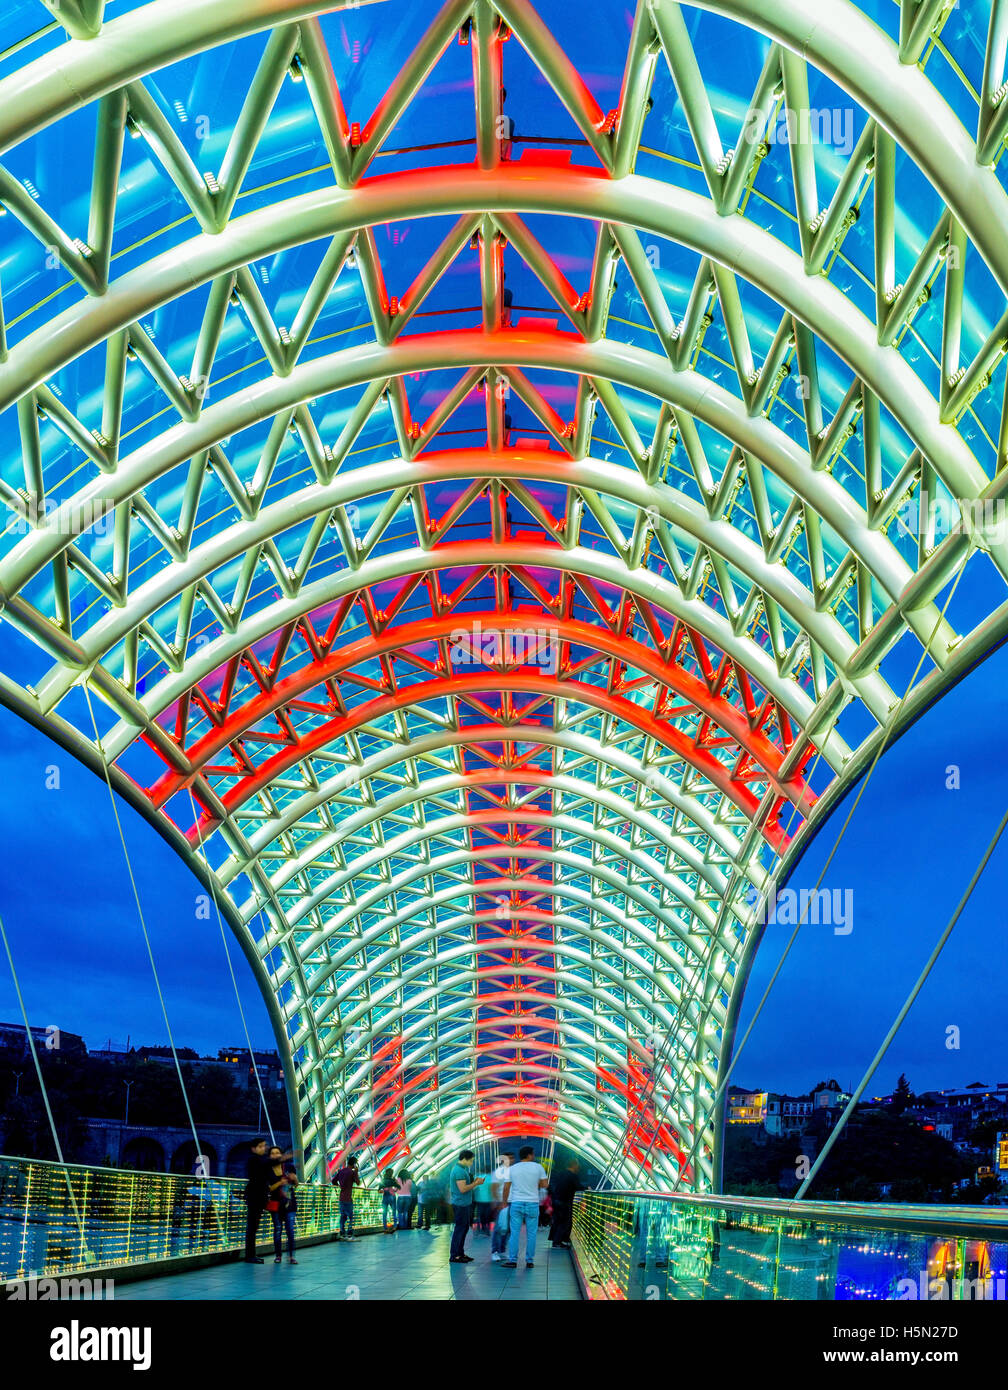 The glass tent of the Peace Bridge illuminated in colors of National Flag of Georgia Stock Photo